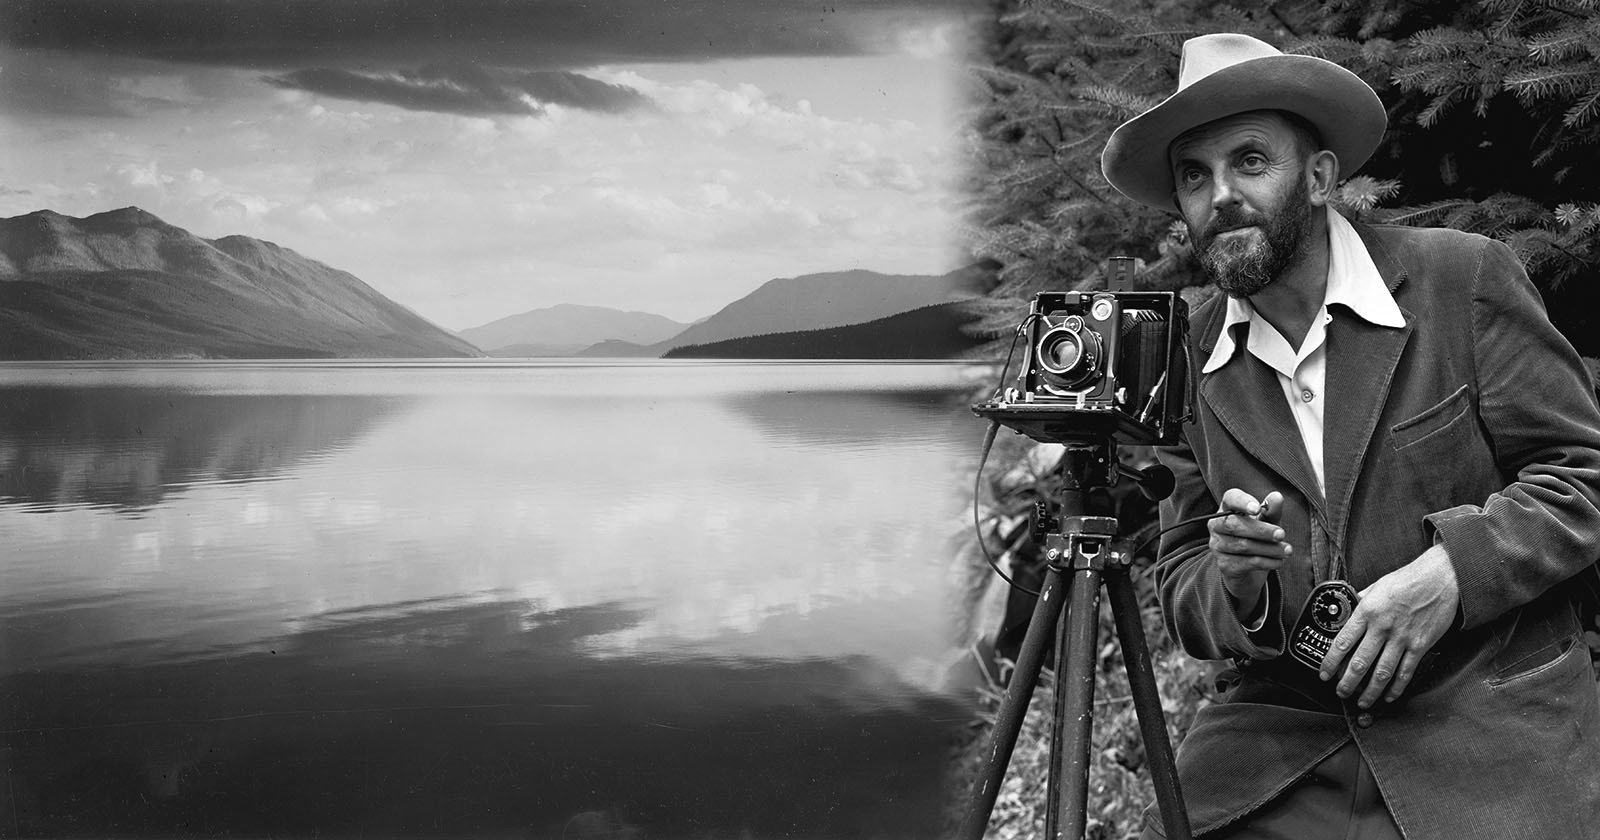 Remembering Ansel Adams Through the Life of One Student